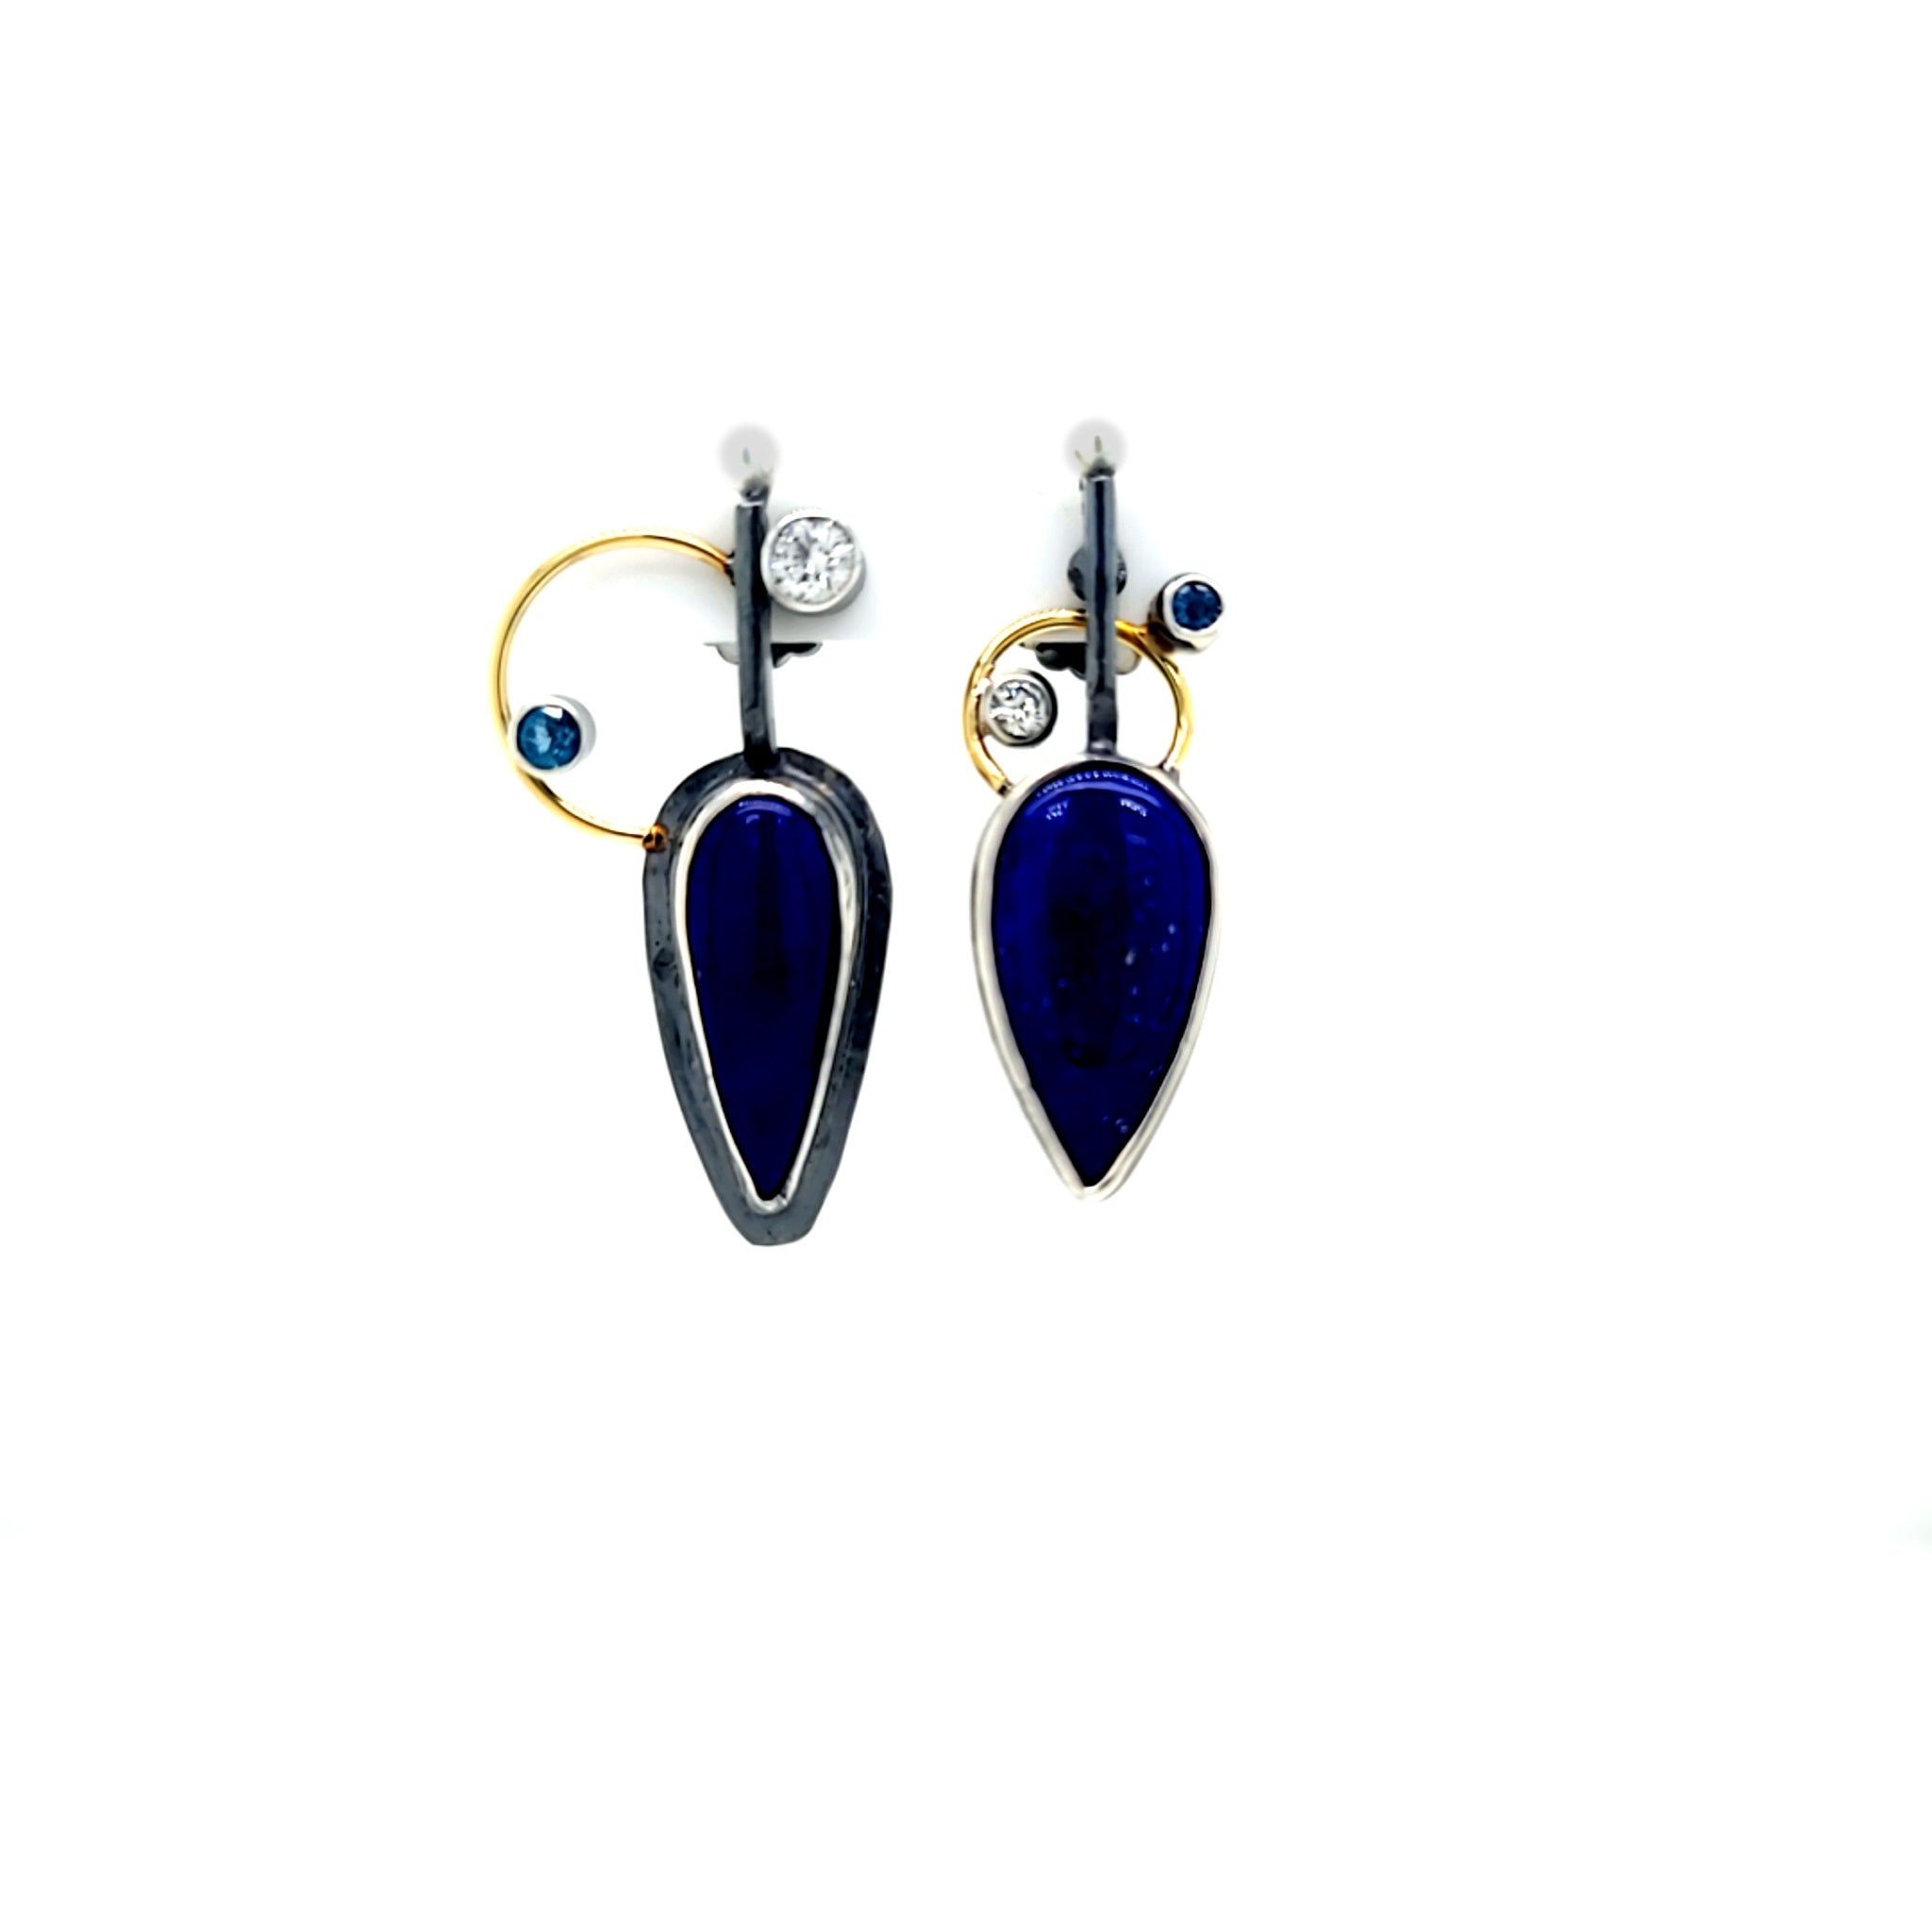 Oxidized Sterling asymmetric earrings with Lapis, Blue Topaz, Cubic Zirconia and Freshwater Pearls with 18k Gold accents.